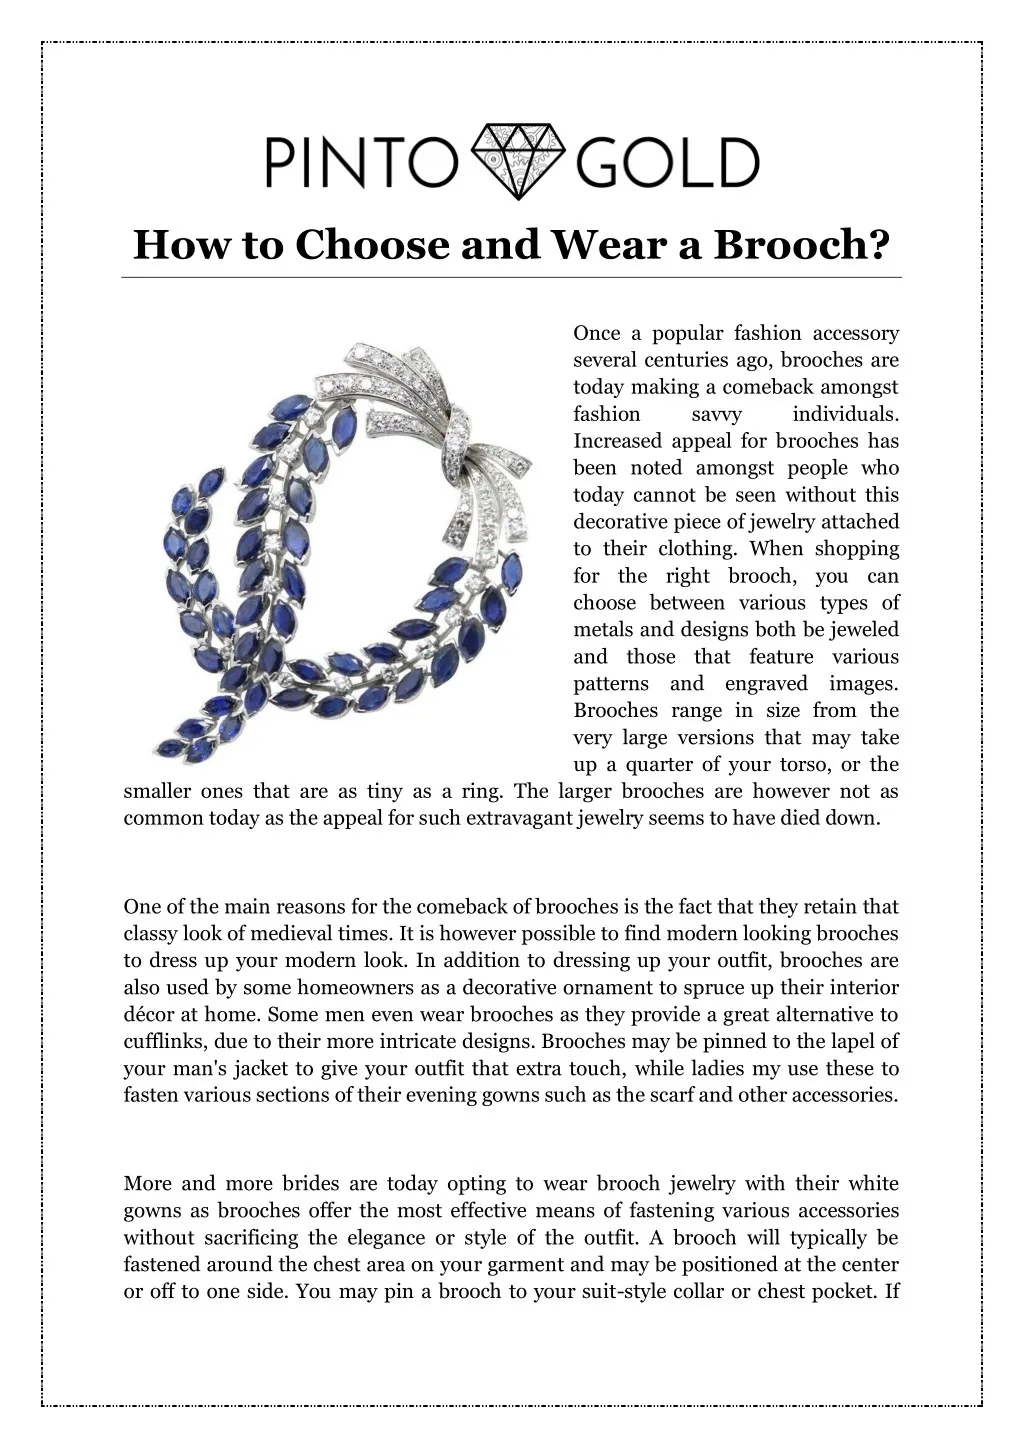 how to choose and wear a brooch